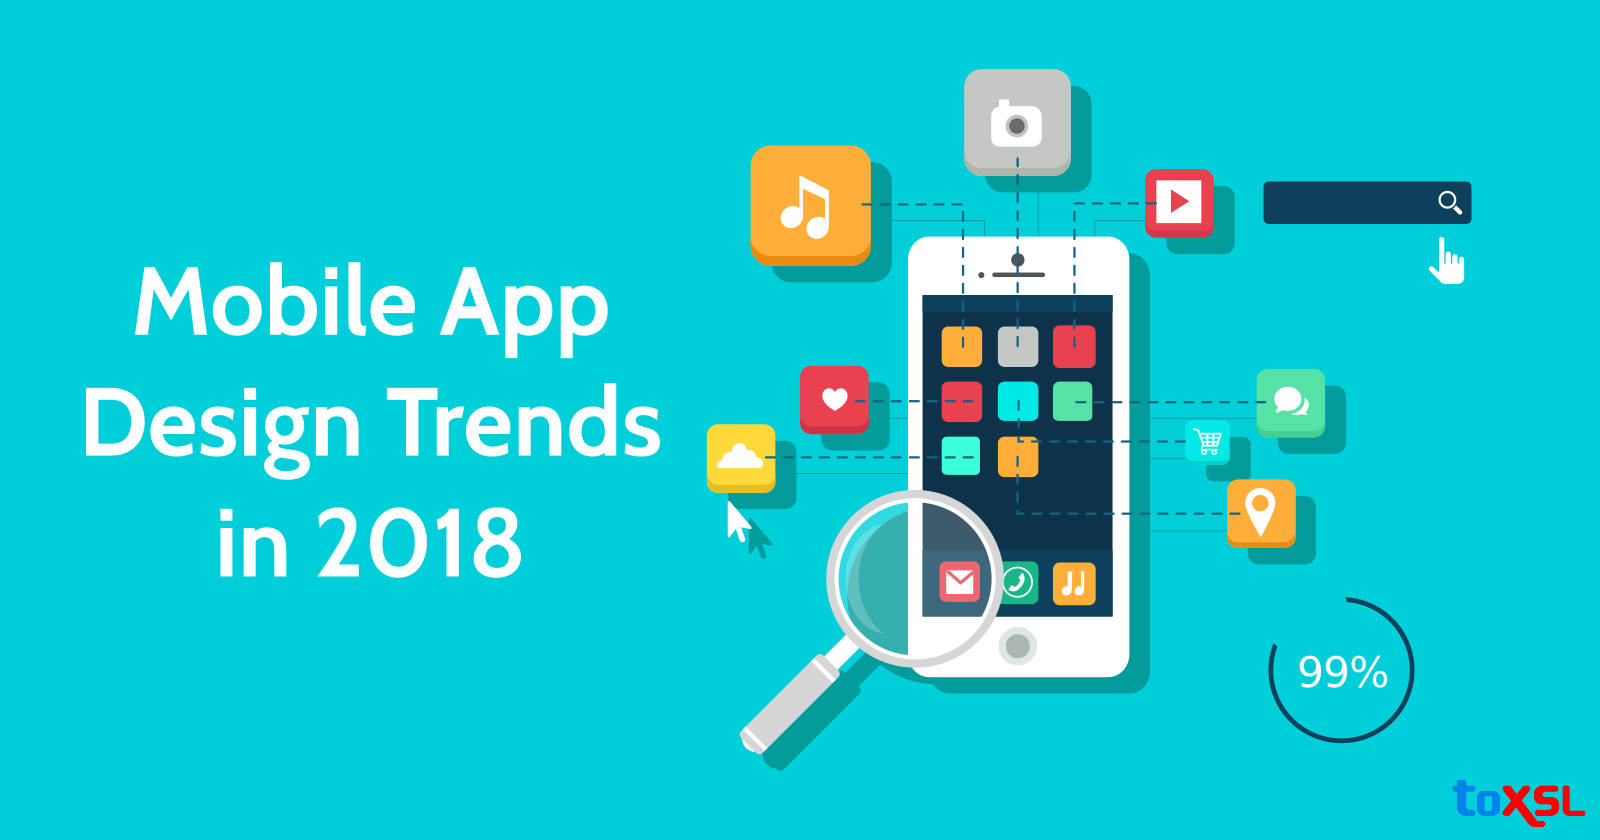 Mobile App Design Trends to Be Followed for User-Friendly Applications